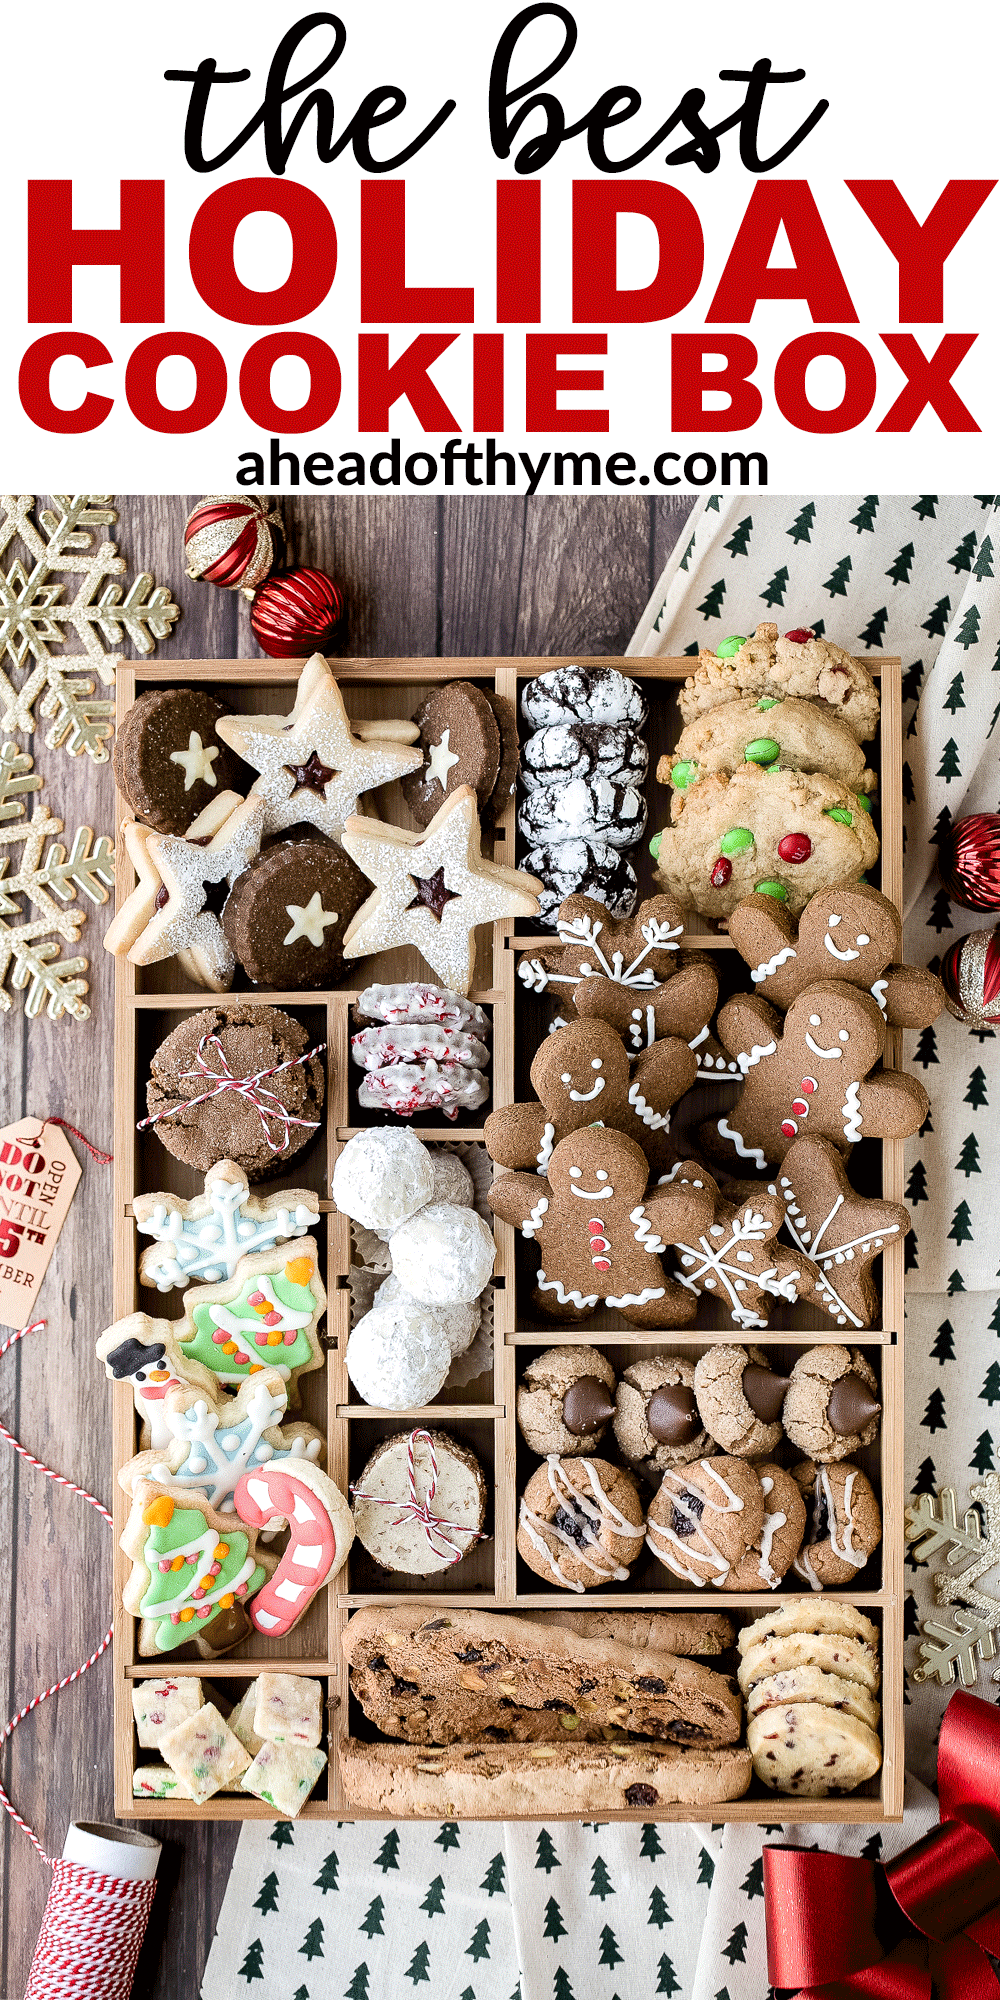 The Best Holiday Cookie Box